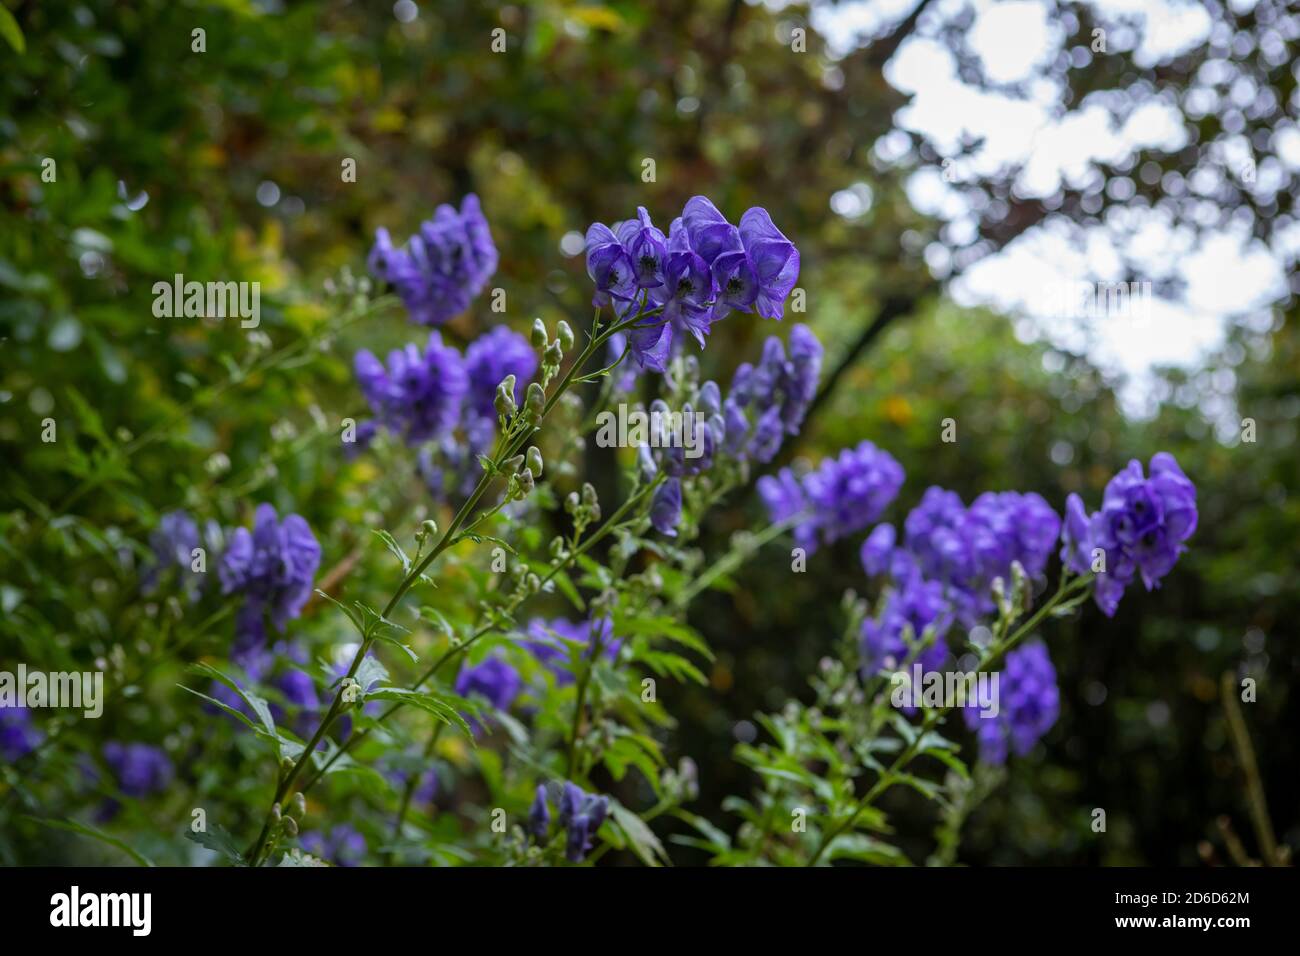 Aconitum carmichaelii (Arendsii Group) 'Arendsii' / monk's hood 'Arendsii' in flower Stock Photo